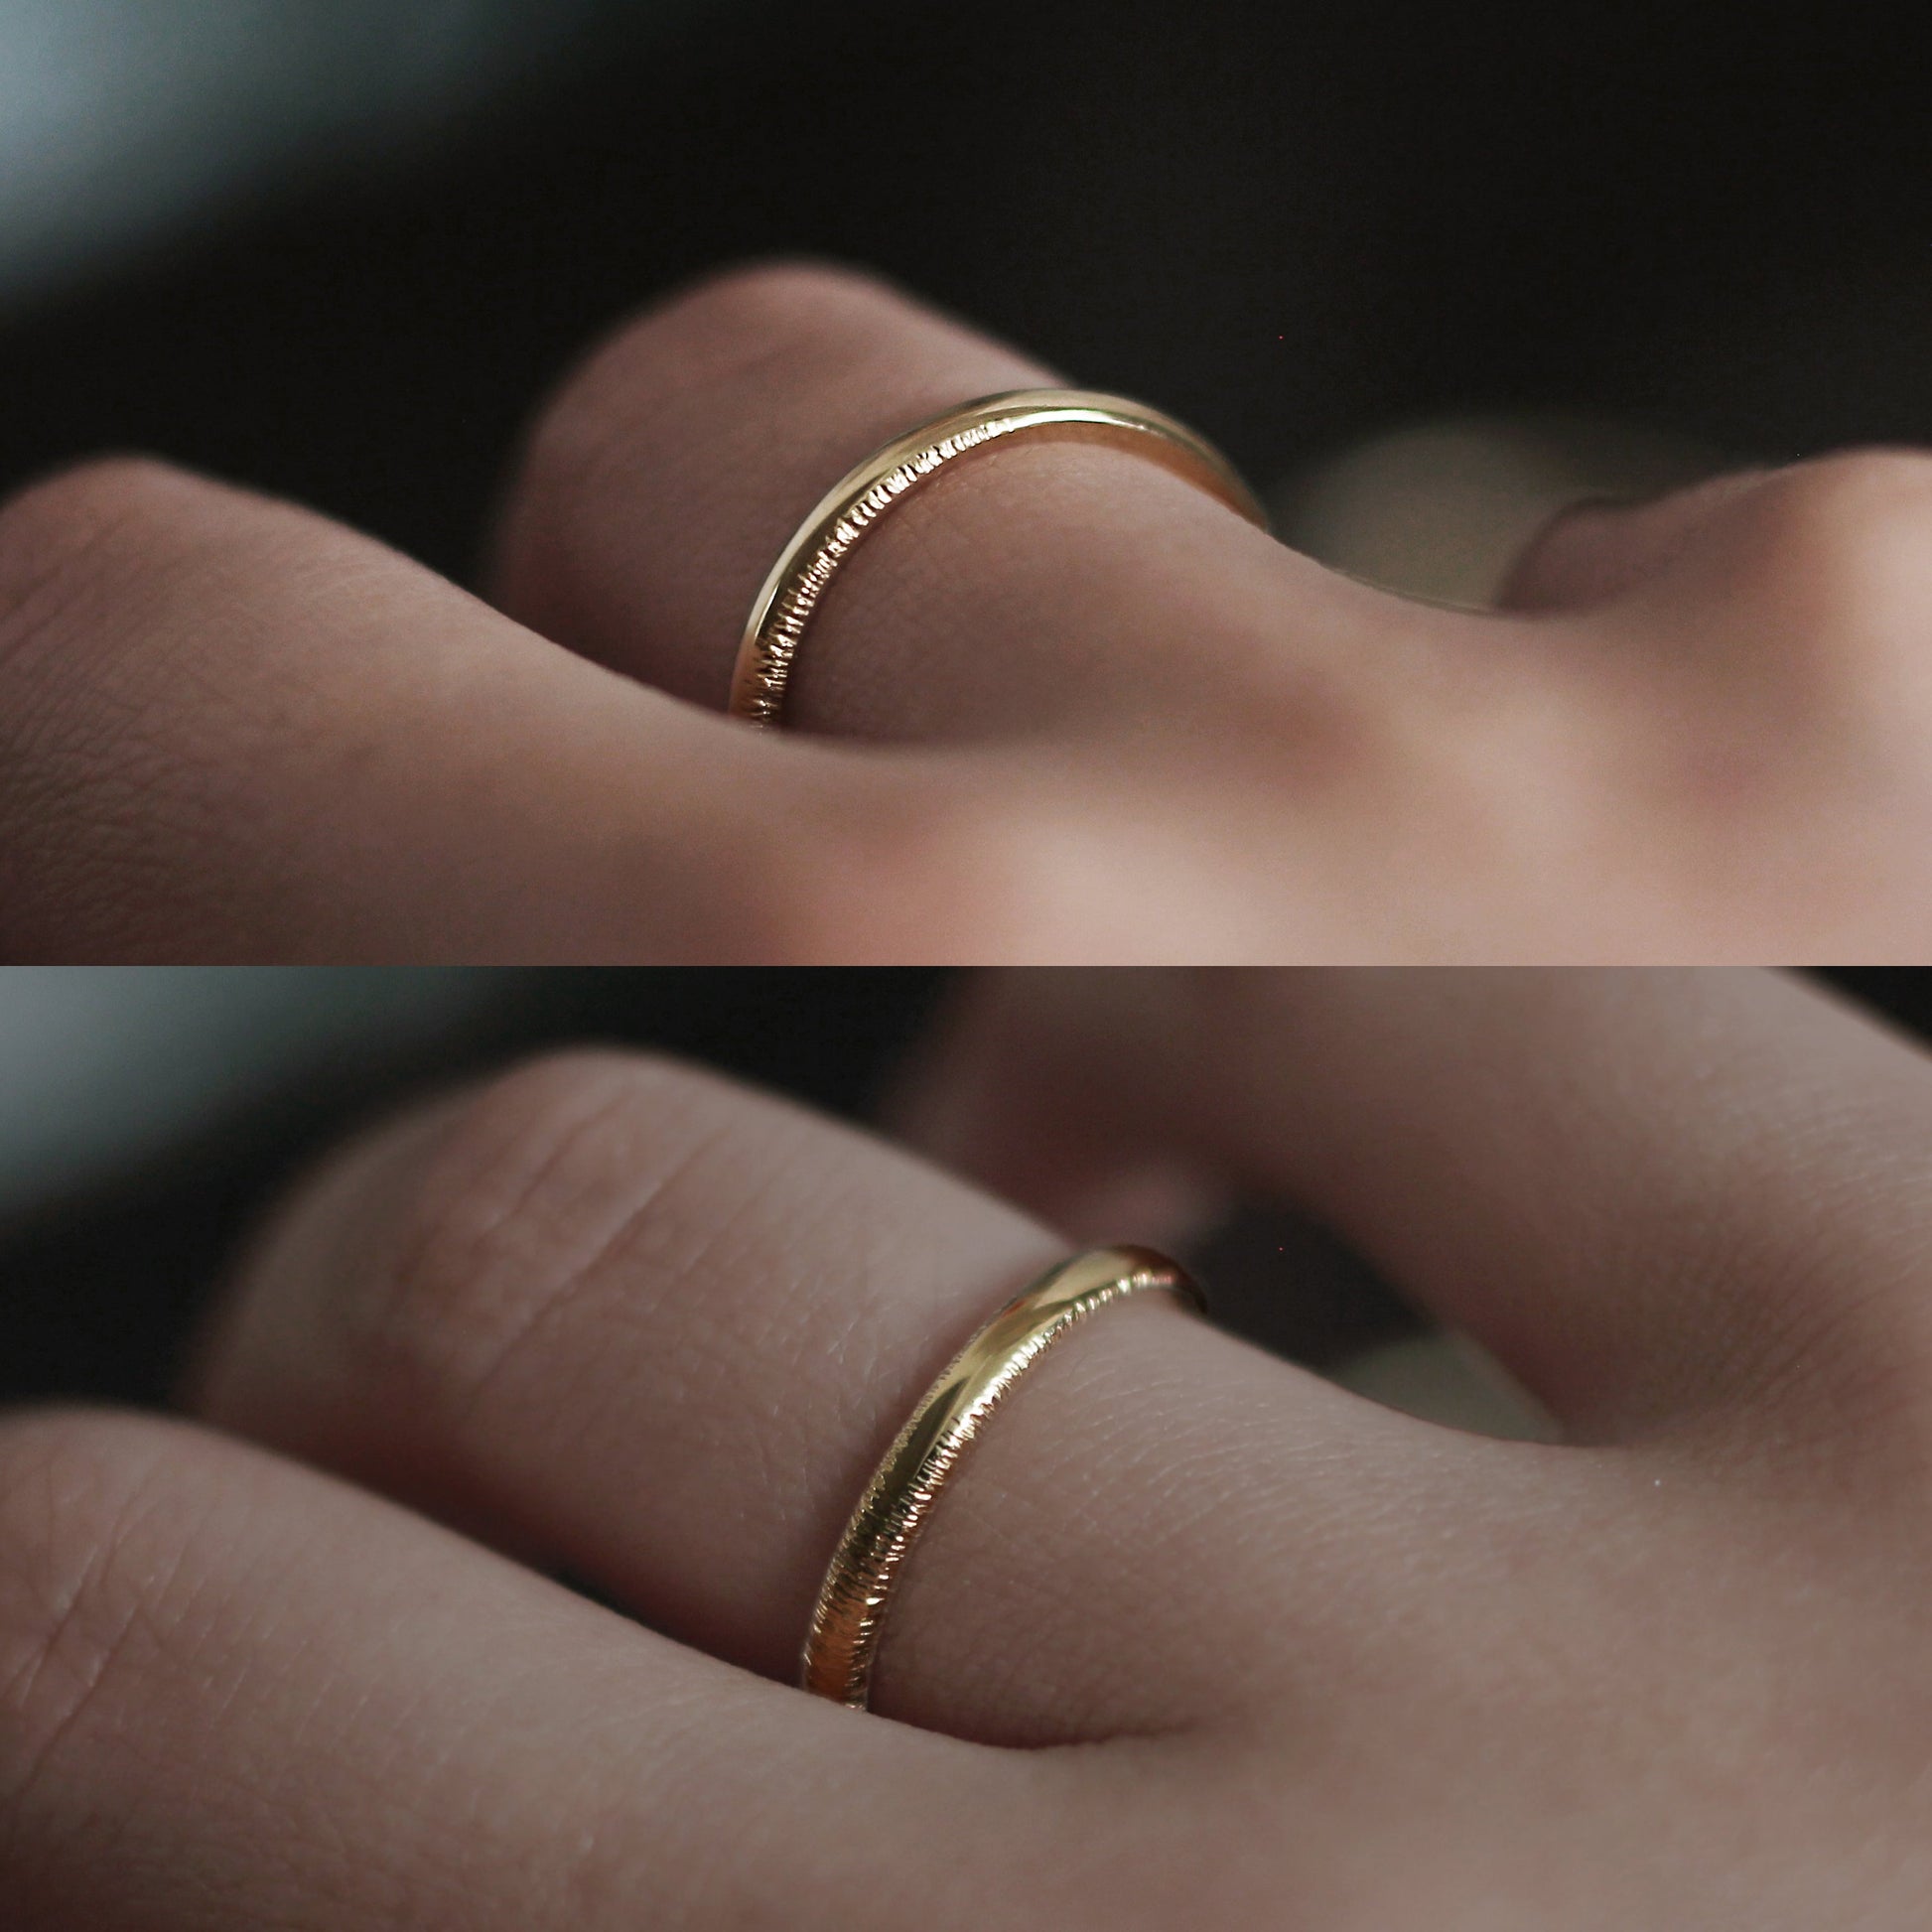 Moonlight Hammered Ring - 9ct / 18ct Gold, different finish from different viewing angles - Aisling Chou Studio